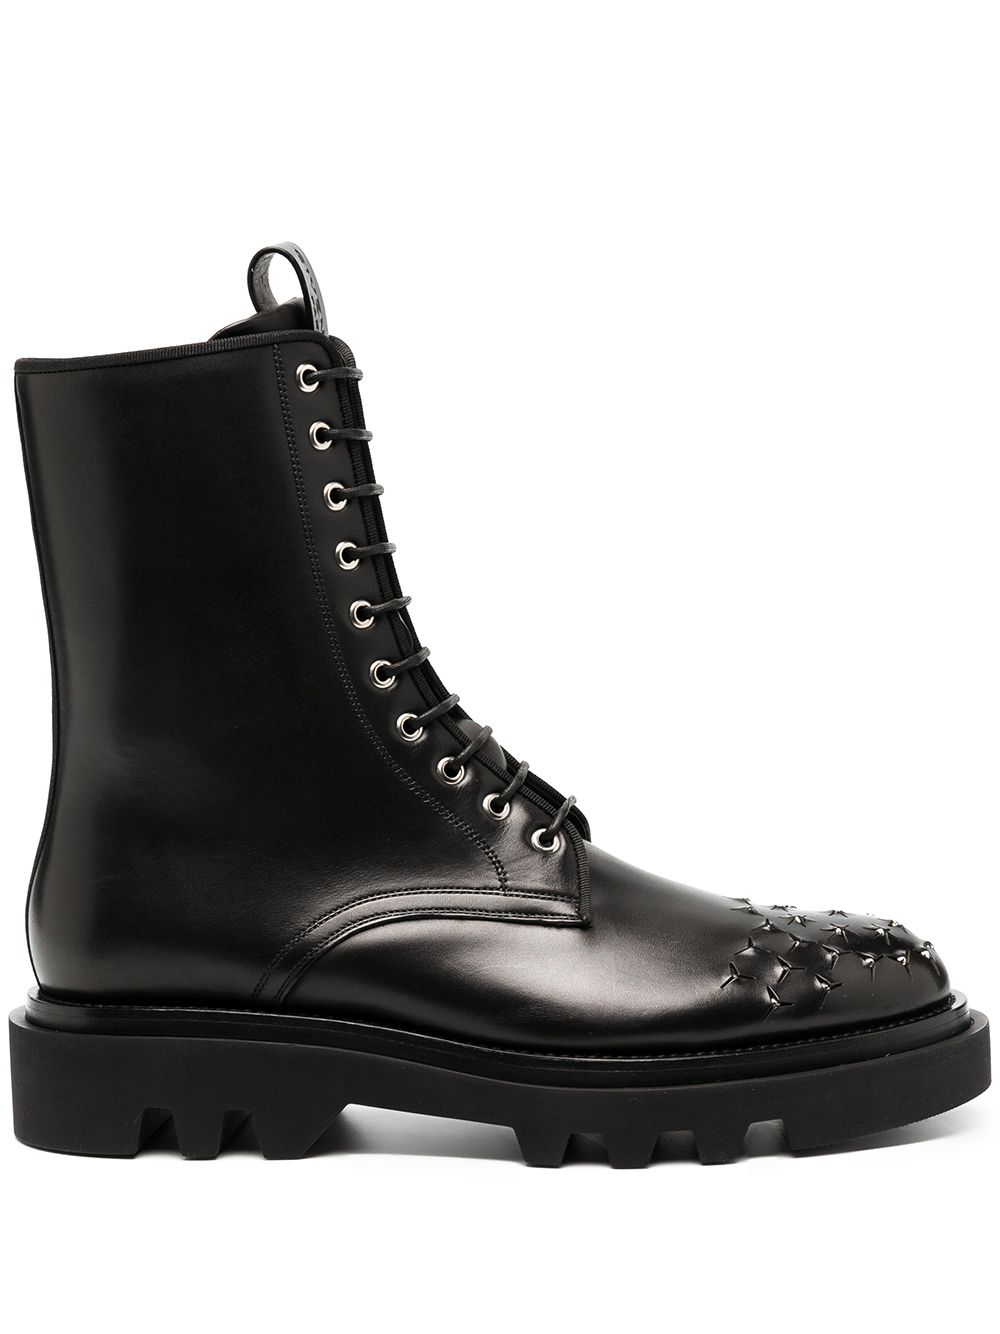 Givenchy erupting-stud Ankle Boots - Farfetch